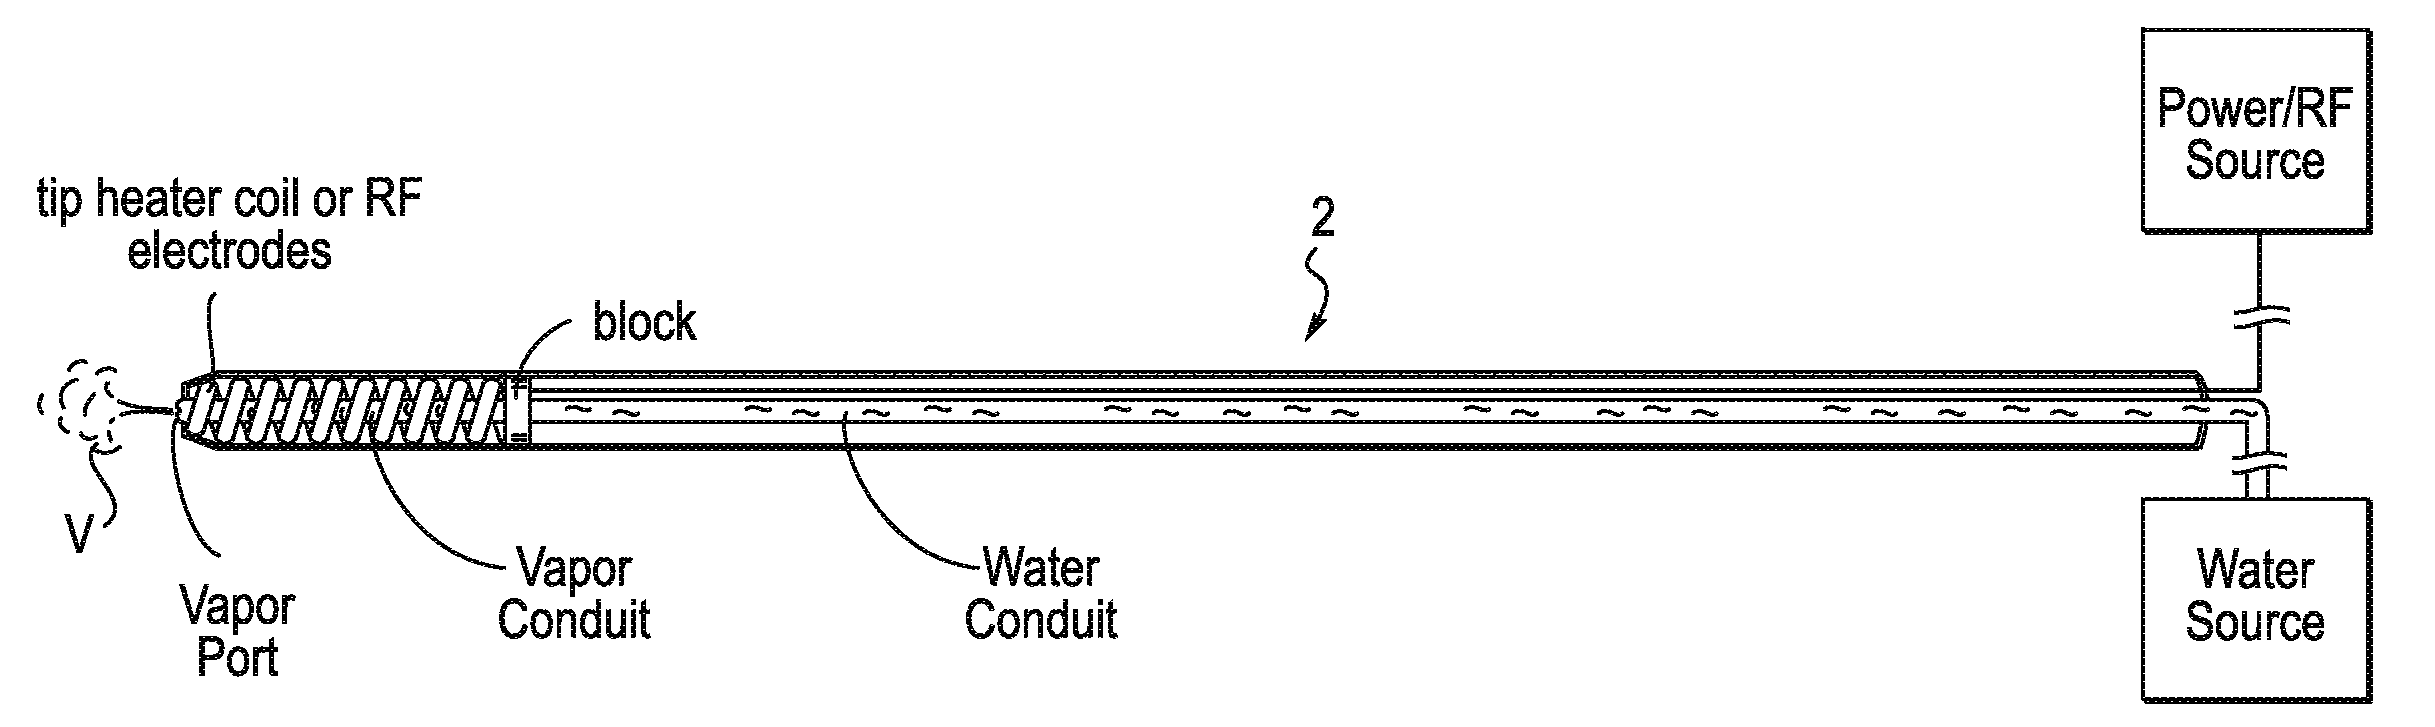 Vein Therapy Device and Method